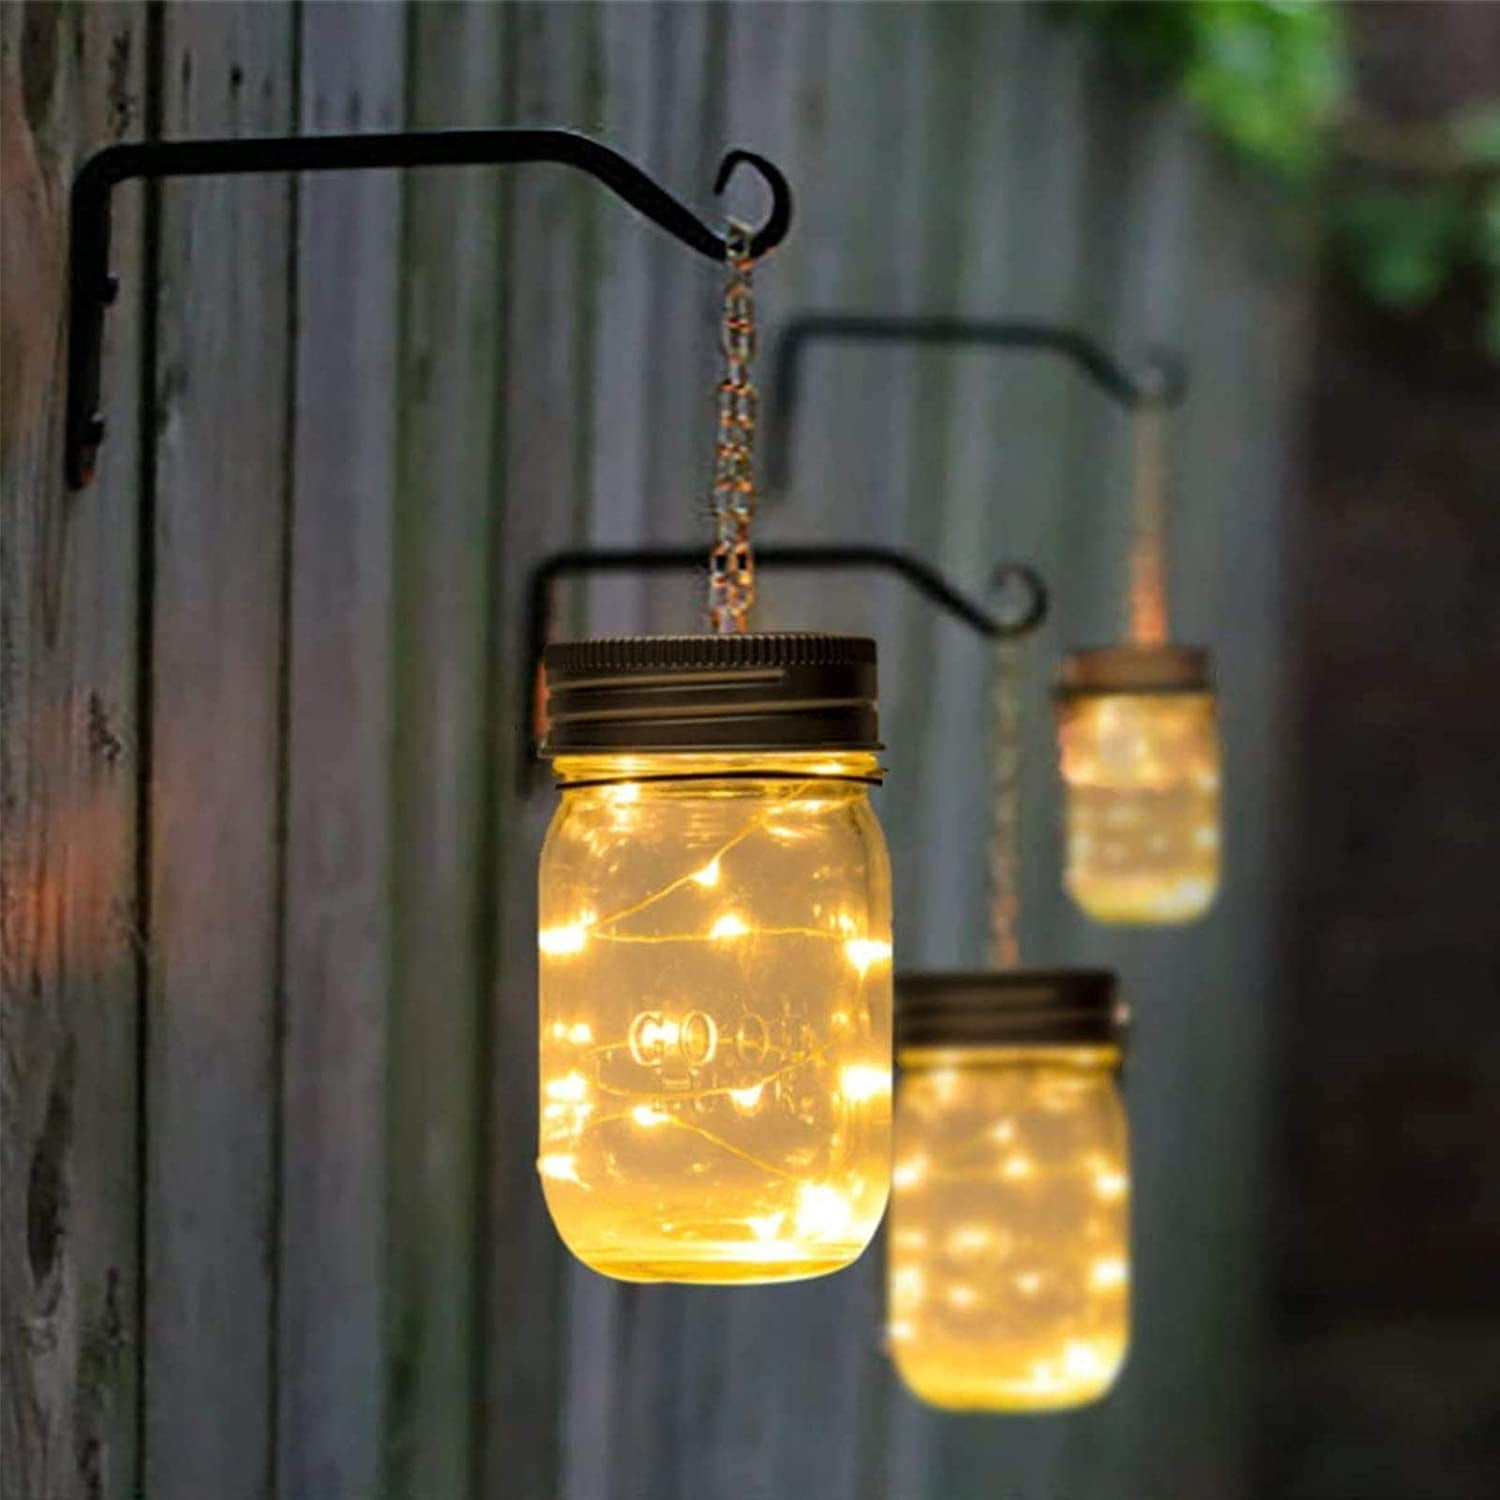 4 Pack 20 LED Hanging String Lights Solar Lantern Hangers with Metal Handle 8 Lighting Modes String Fairy Lights for Table Outdoor Patios Party Garden Décor Lights Upgraded Solar Mason Jar Lid Lights